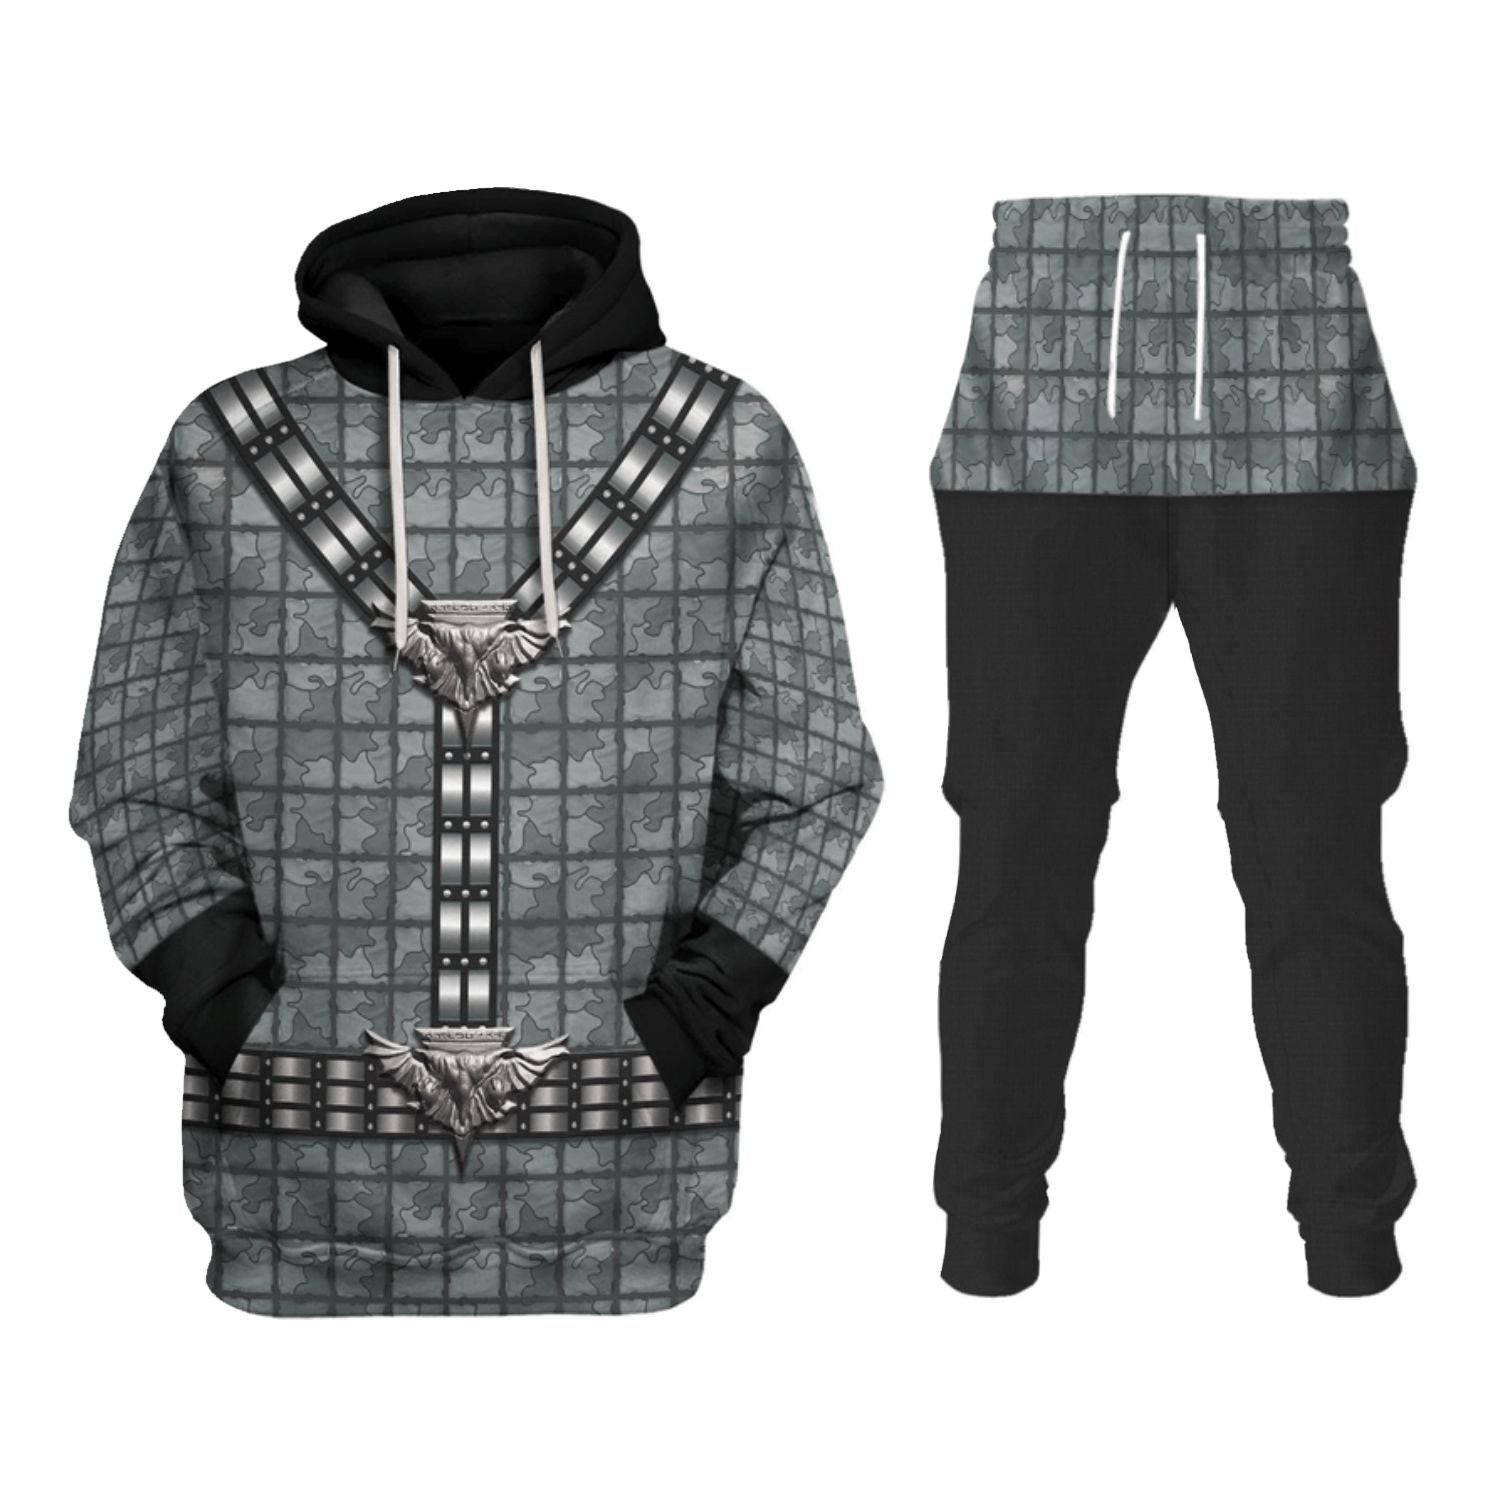 The Next Generation The Romulan track suit 